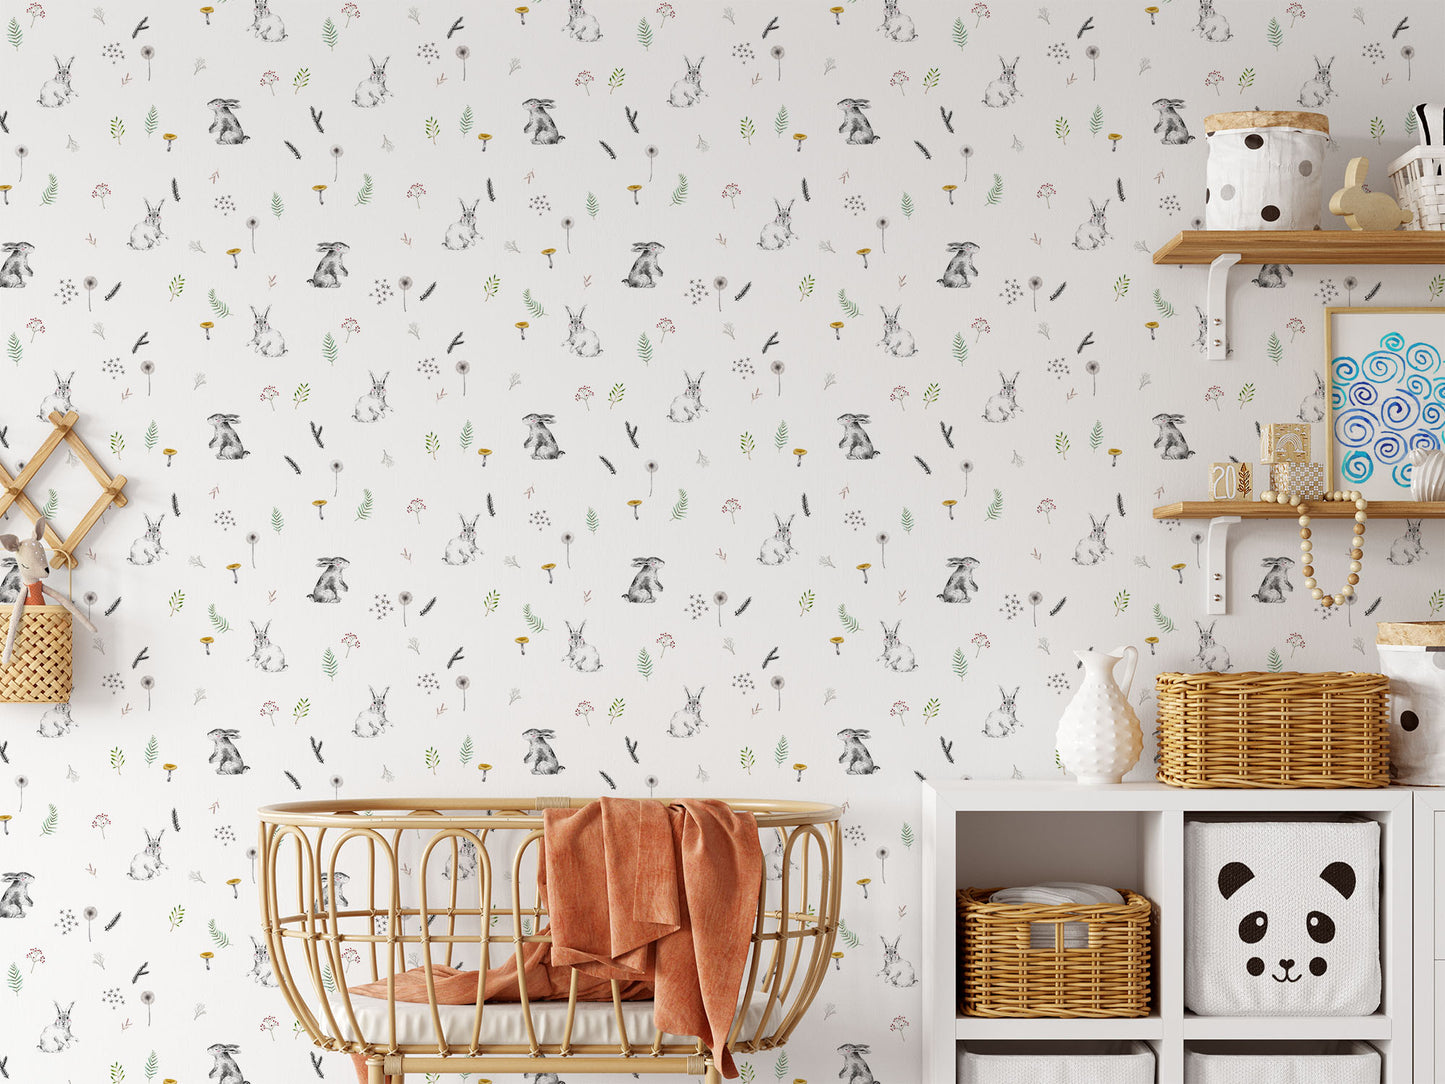 bunny/bunnies, mushroom, leaves on white background easy to install and remove peel and stick custom wallpaper available in different lengths/sizes locally created and printed in Canada. Removable, washable, durable, commercial grade, customizable and water proof.